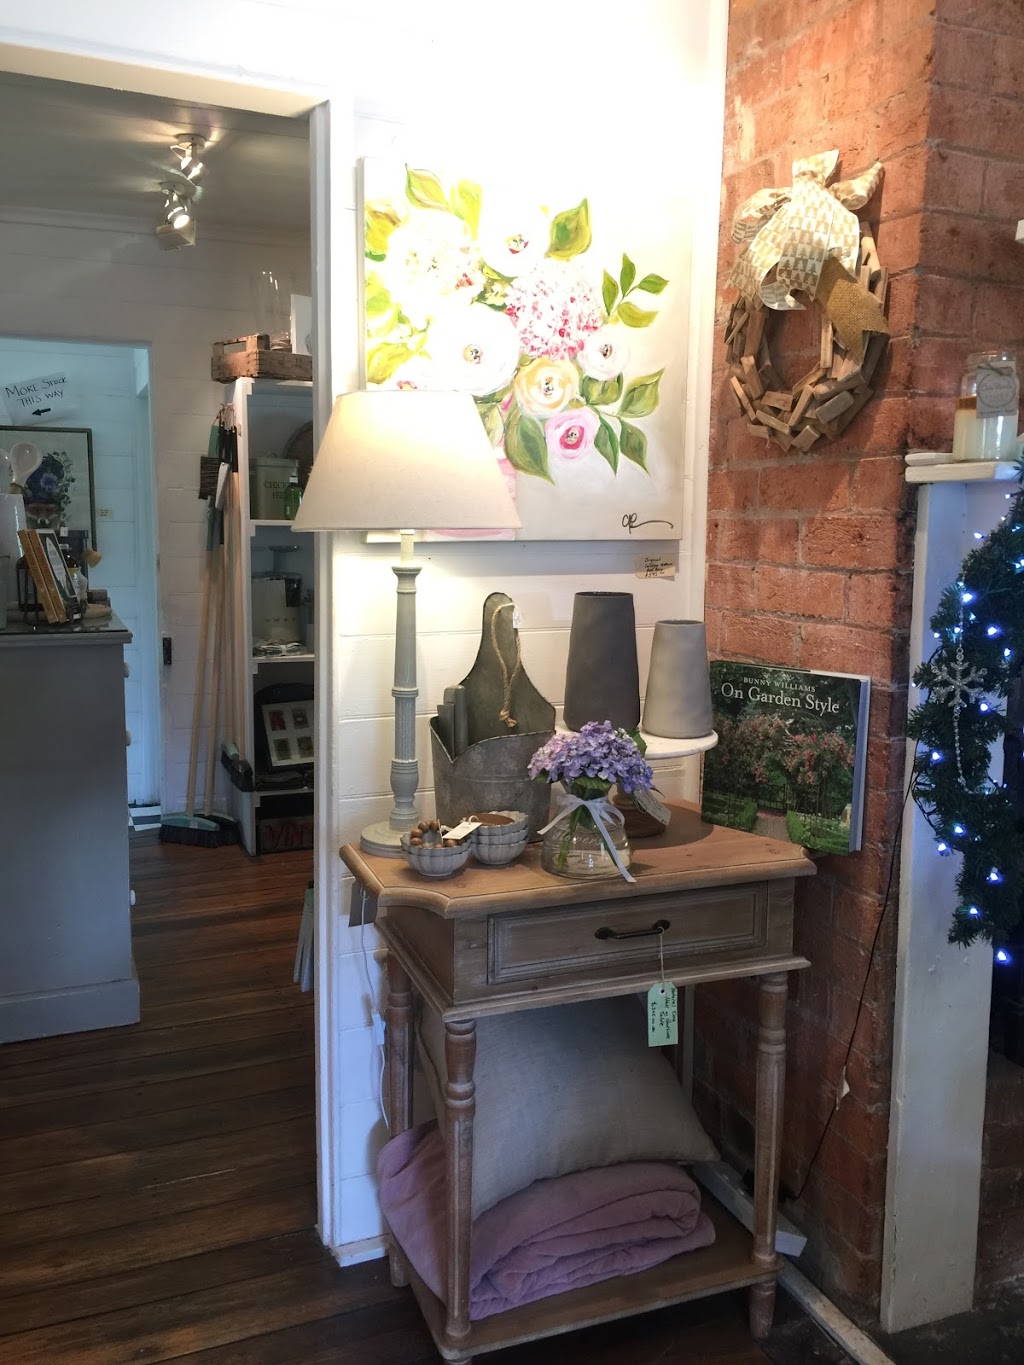 The Summerhouse Store | home goods store | Whare Tau - Cottage, 2 Exeter Rd, Exeter NSW 2579, Australia